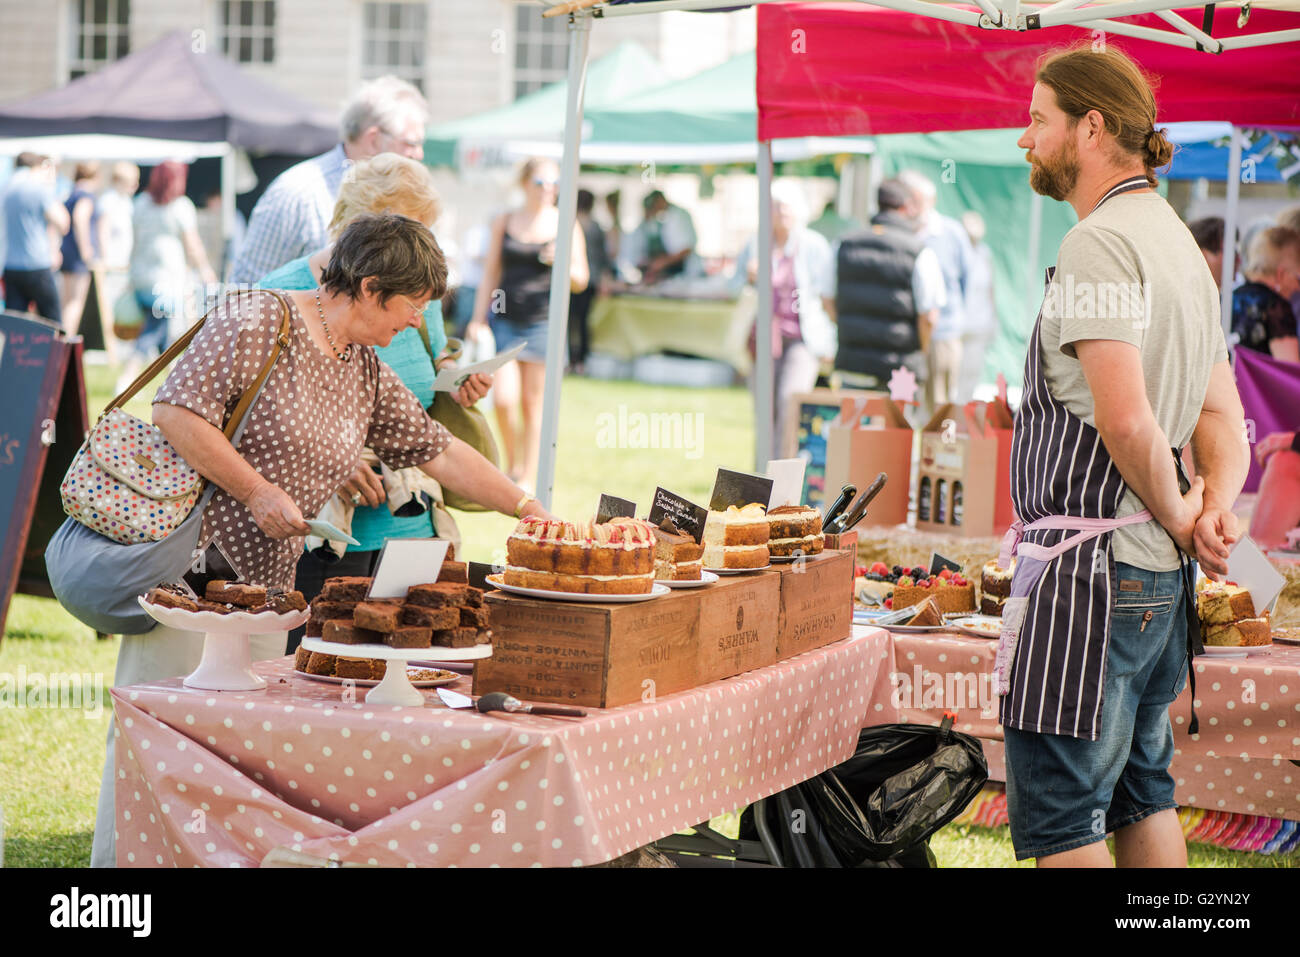 Plymouth, England - June 5, 2016 Good Food Sunday Market held at Royal Williams Yard harbour in Plymouth,  UK attract many food lovers from all over county on this sunny and worm Sunday, June 5th. Credit:  marcin jucha/Alamy Live News Stock Photo